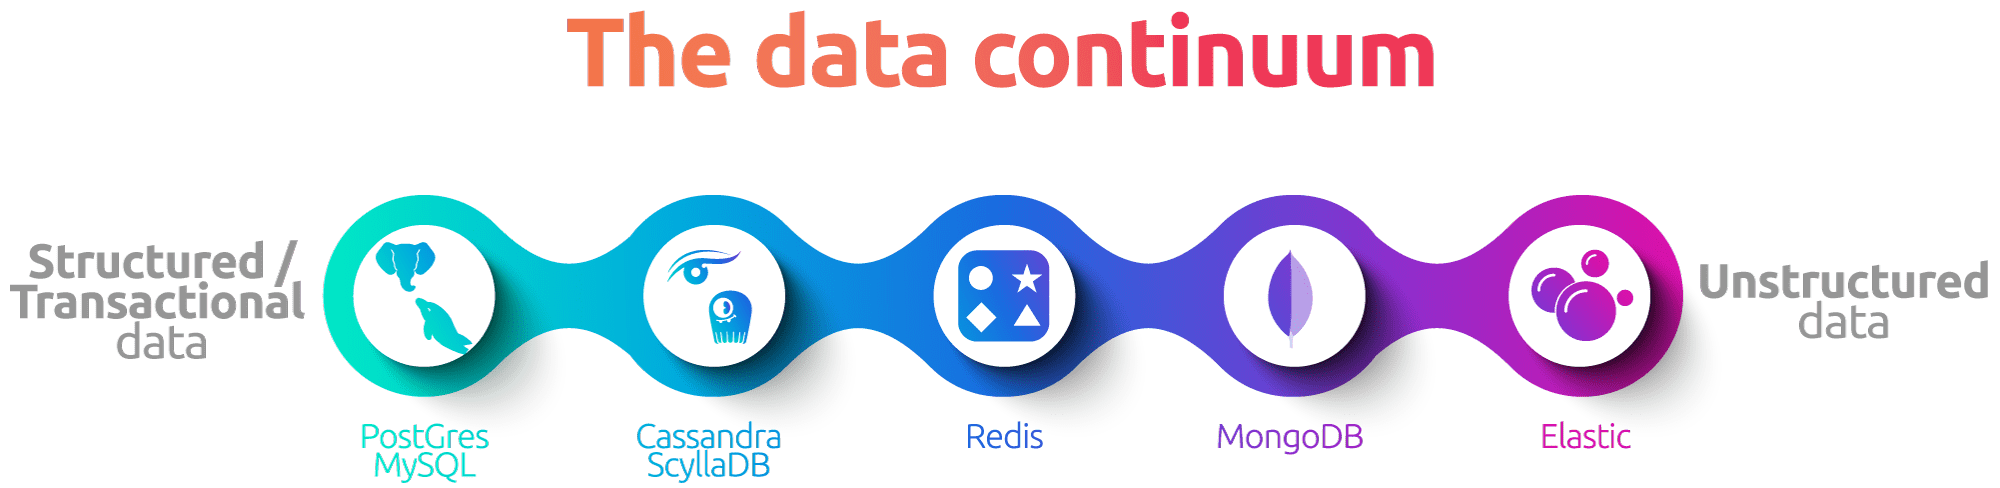 image showing the data continuum from unstructured to structured with Cassandra highlighted